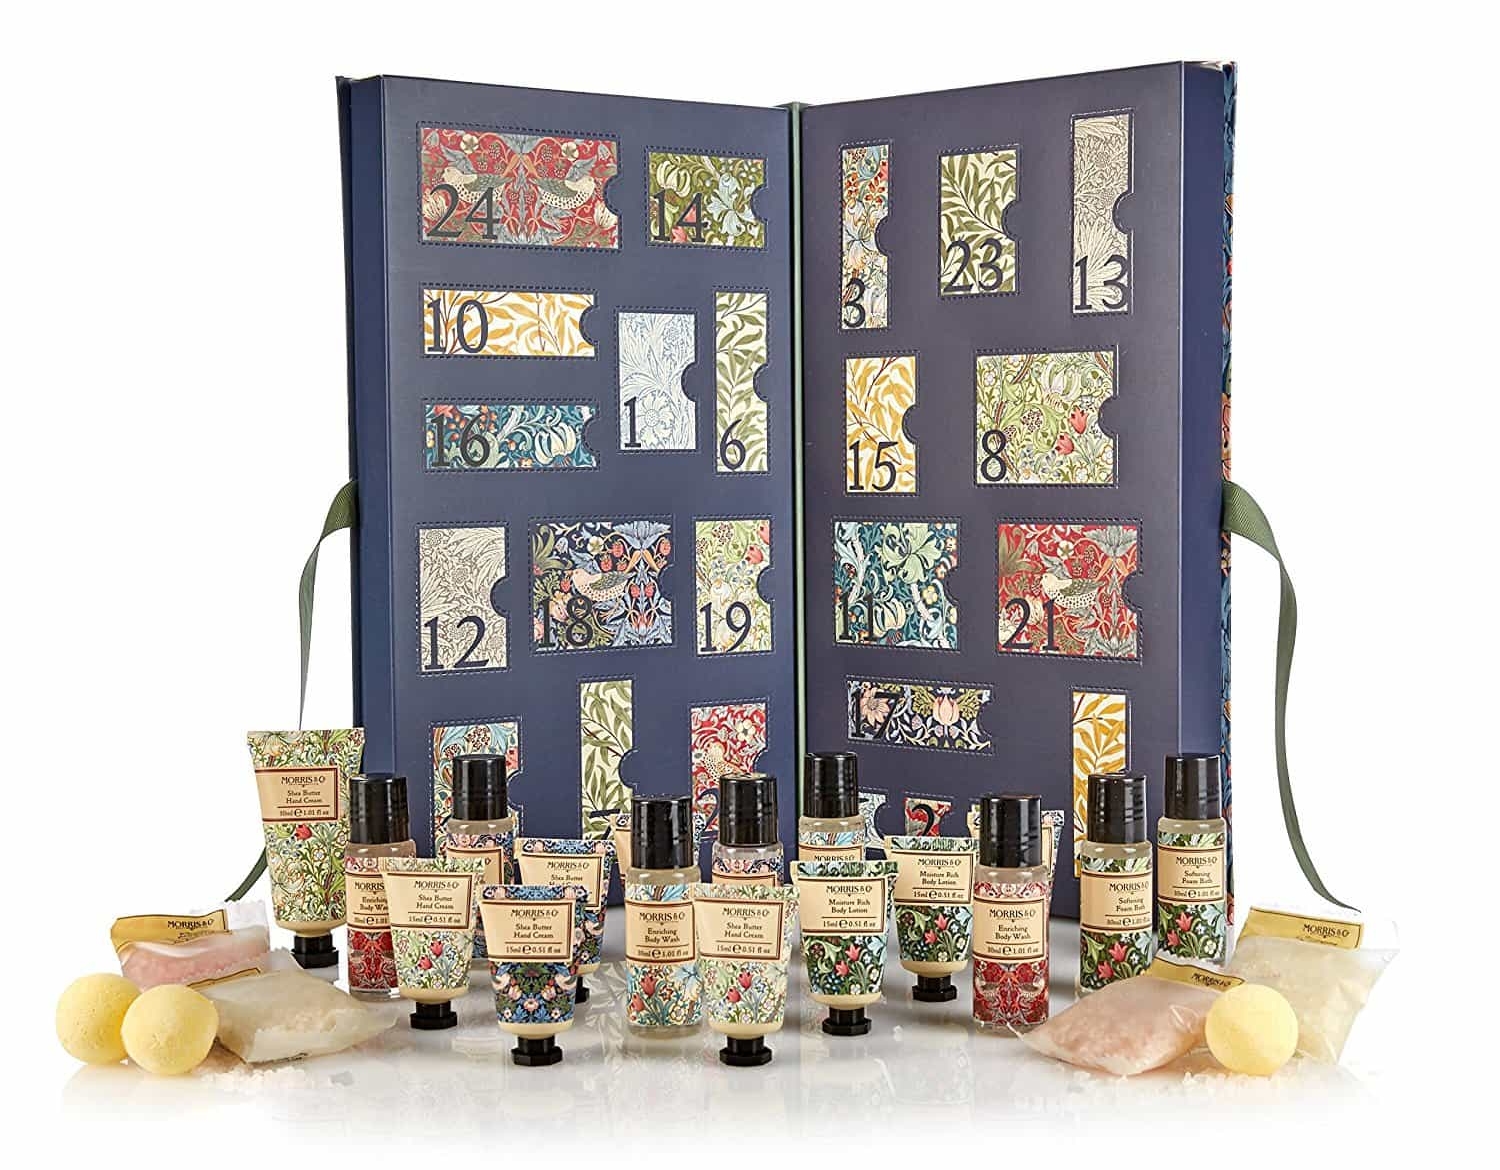 William Morris Co Beauty Advent Calendar 2017 Available Now in the